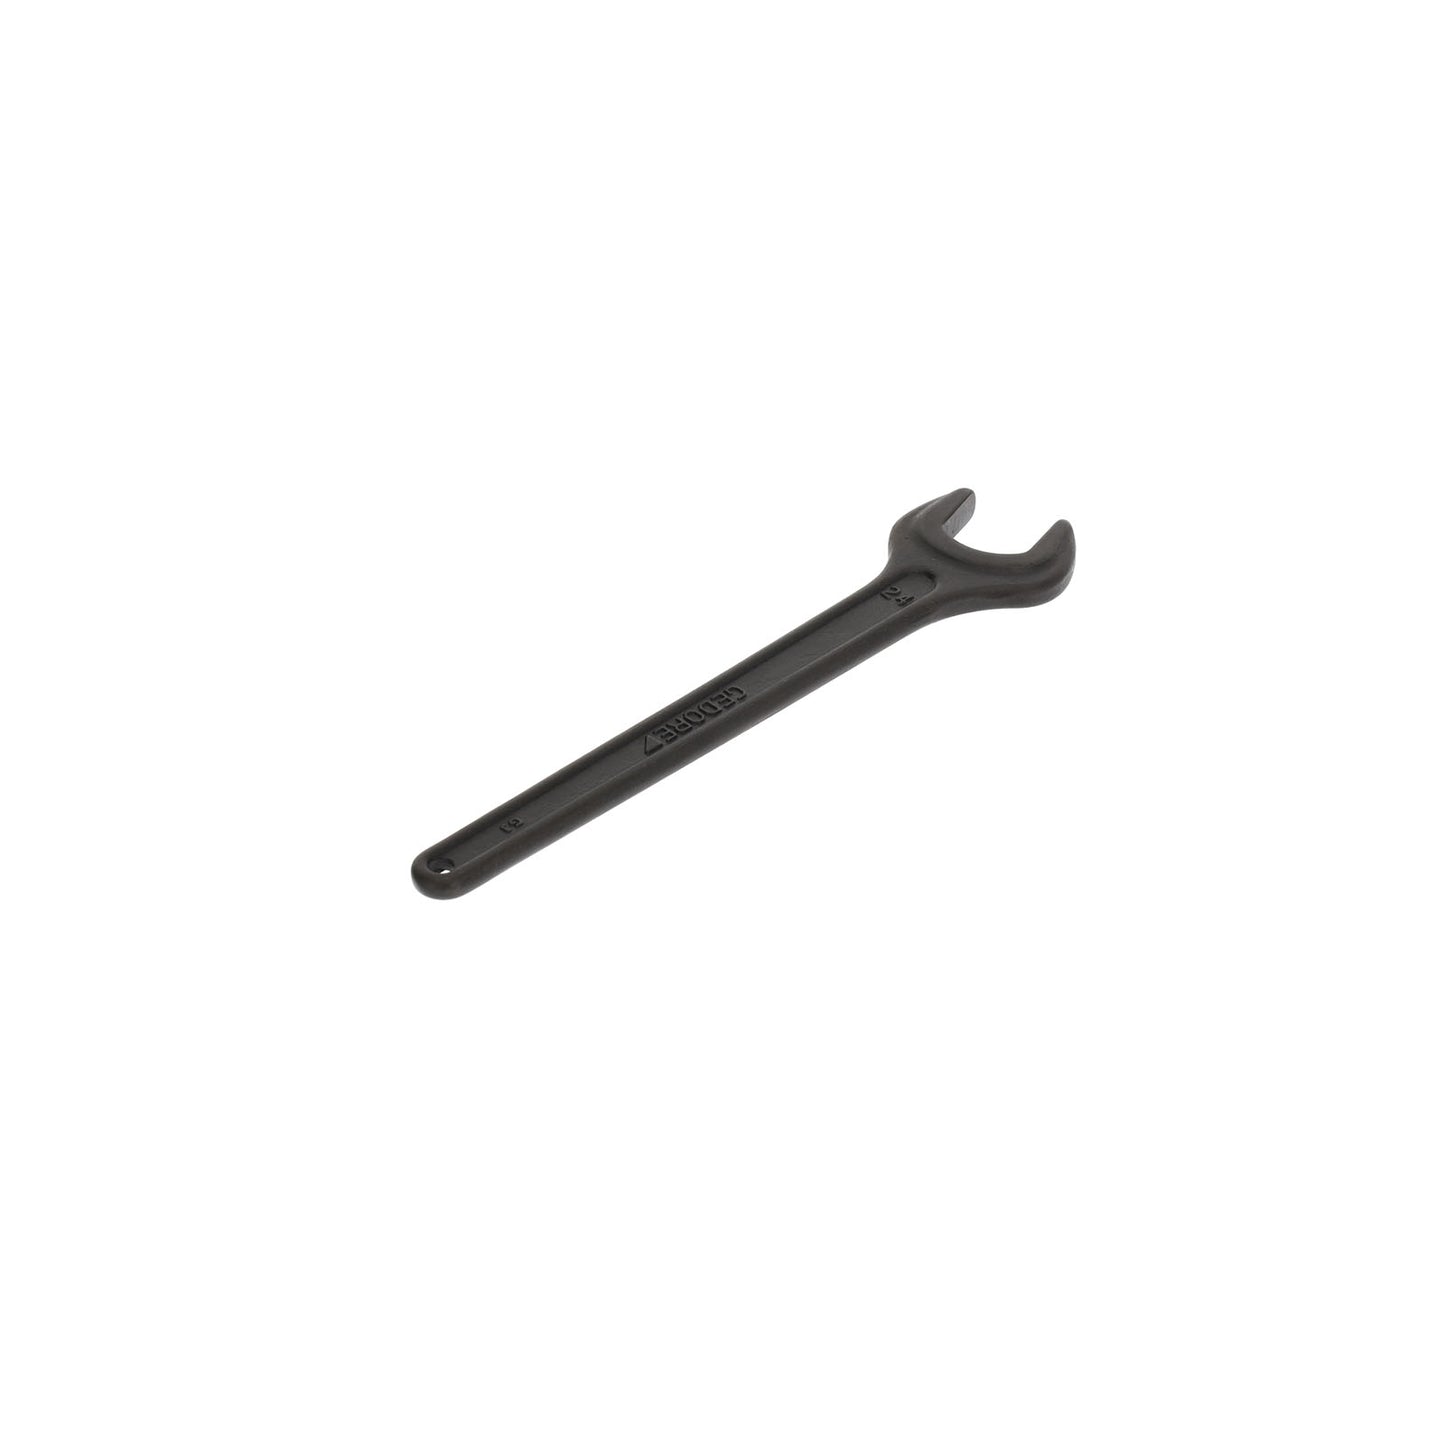 GEDORE 894 24 - 1 Open End Wrench, 24mm (6575570)